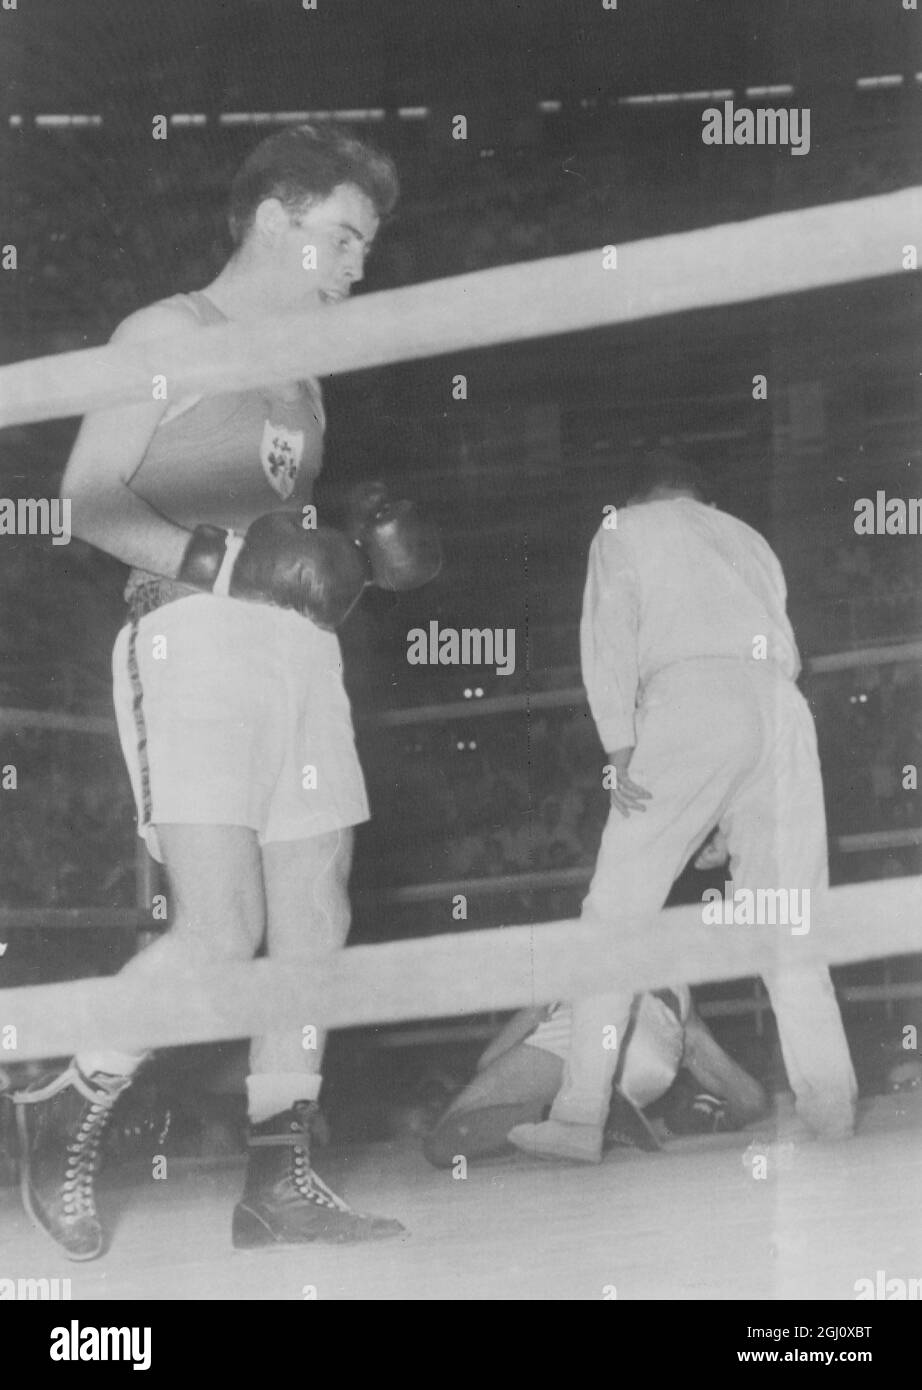 OLYMPIC GAME BOXING LIGHTWEIGHT OBRIEN V AGUILERA 31 AUGUST 1960 Stock Photo